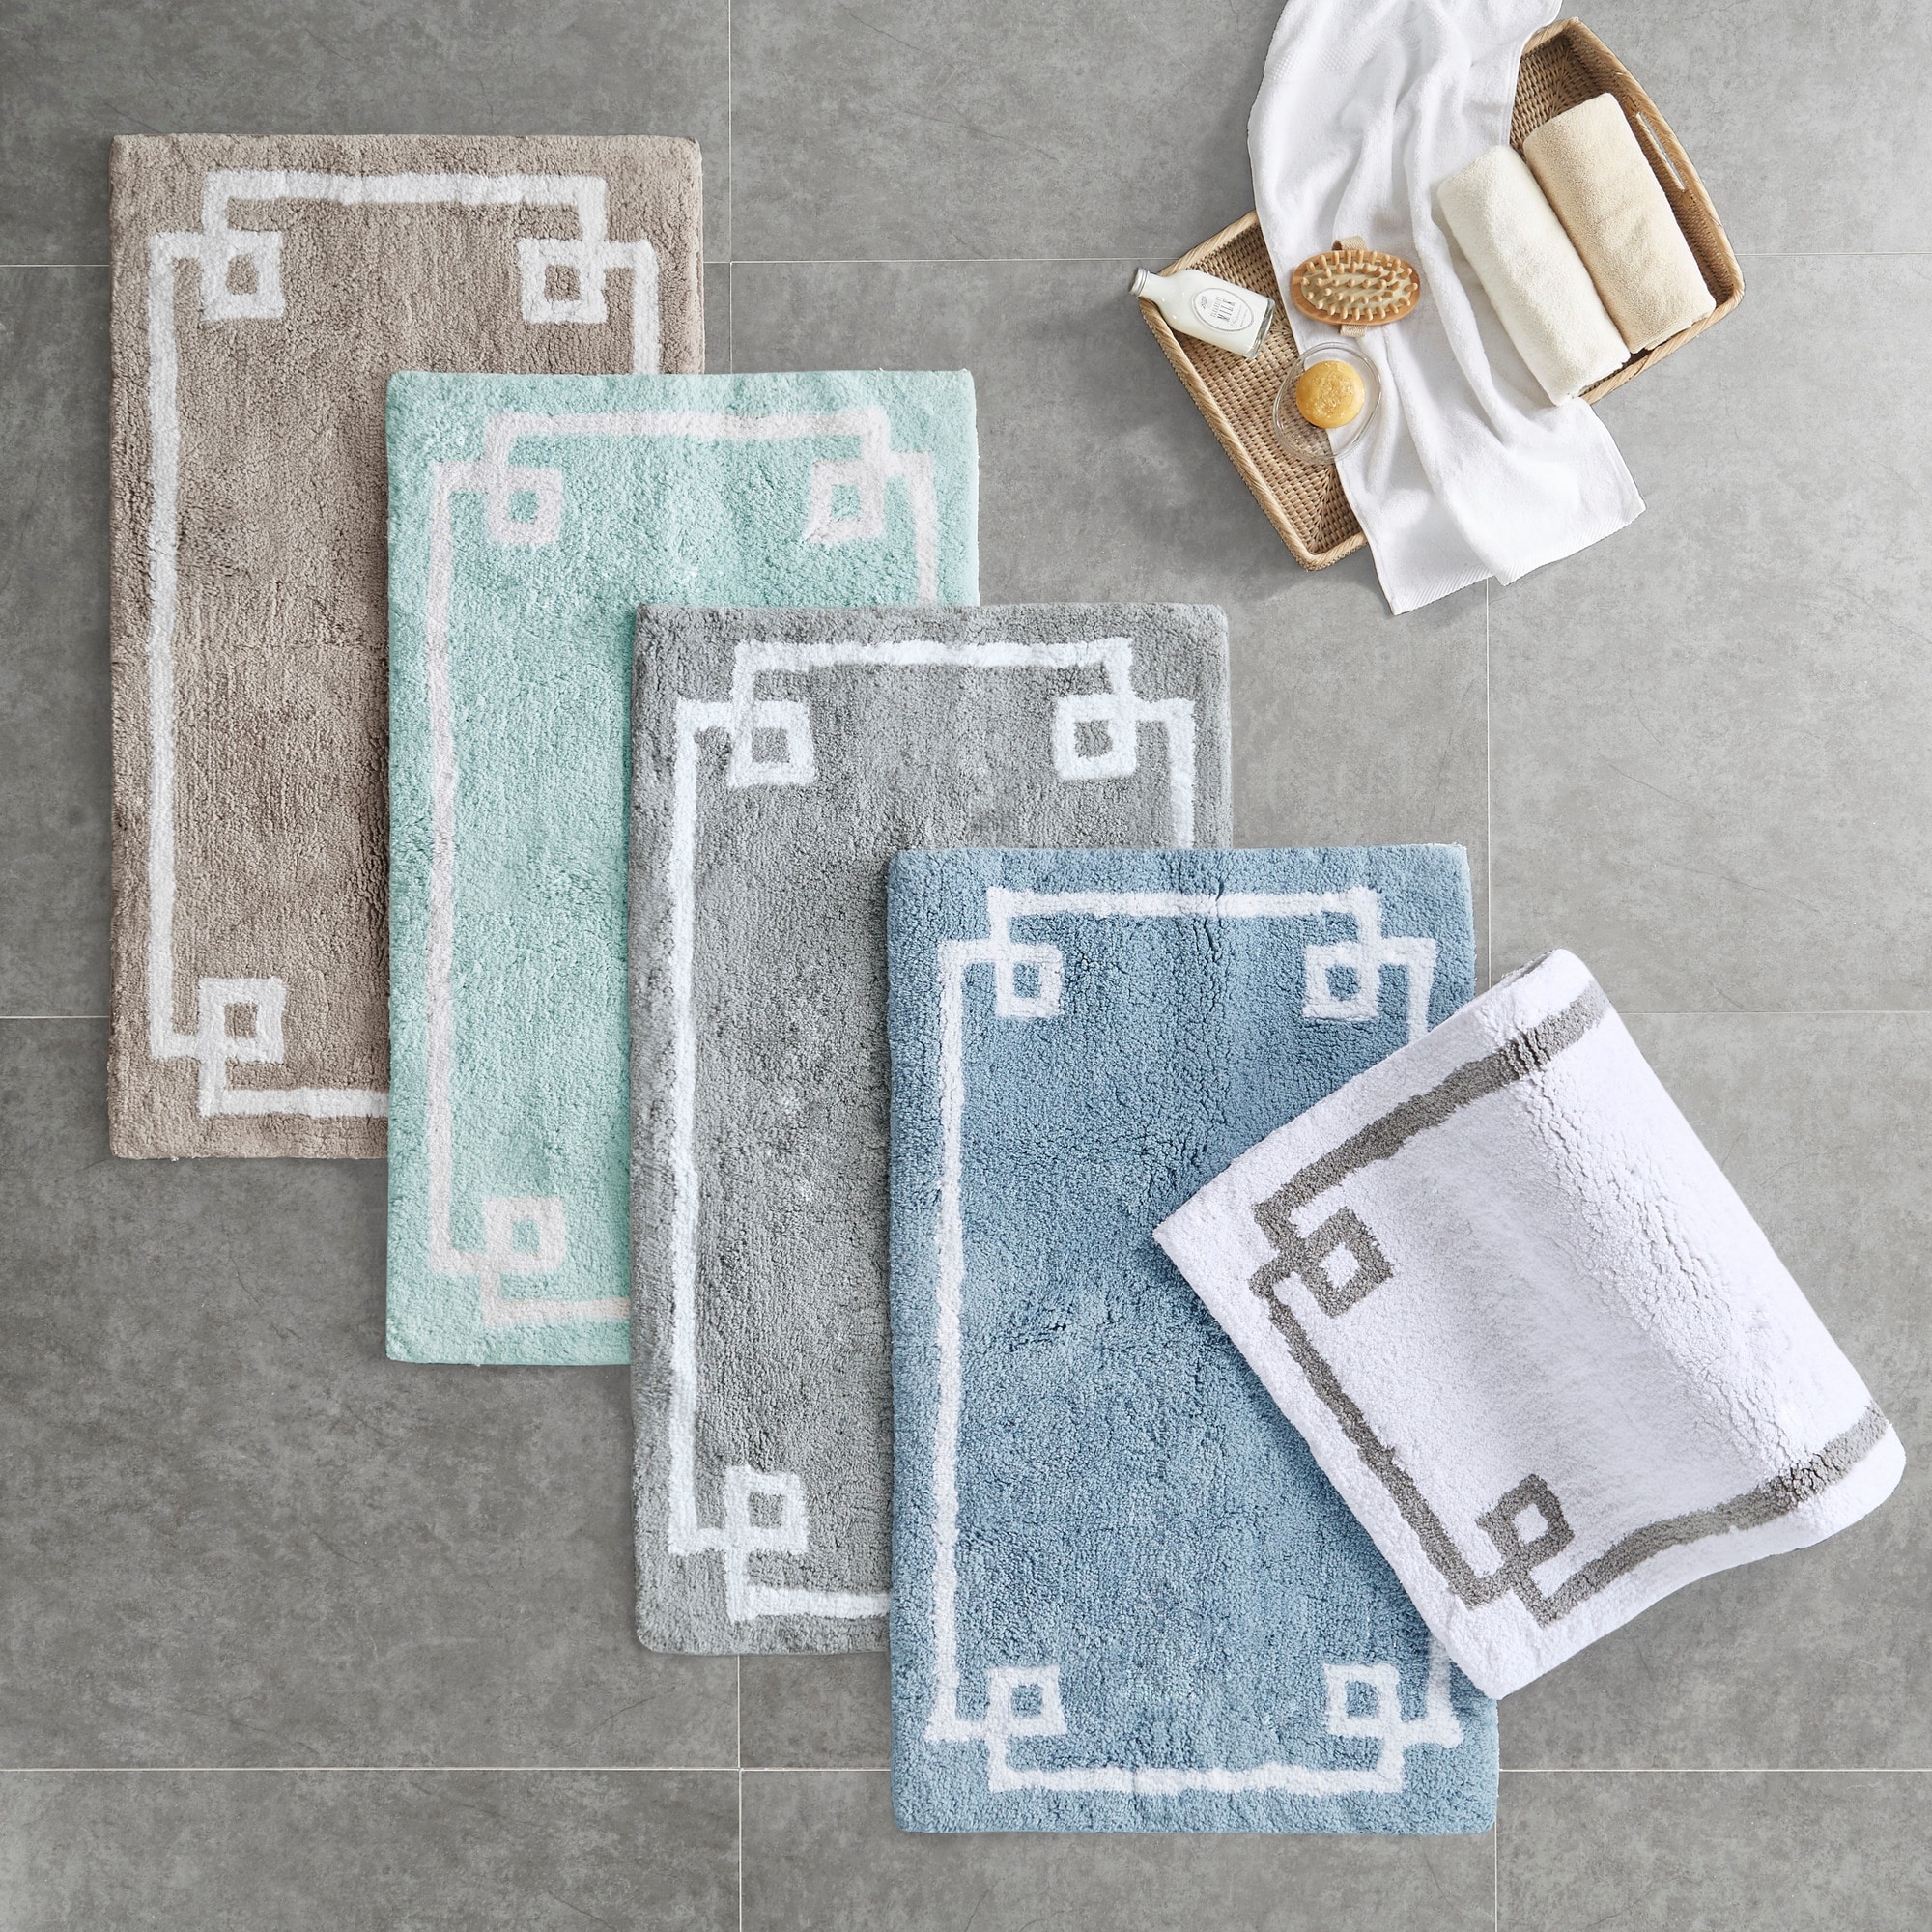 Waterford Soft Tufted Cotton Bath Rugs